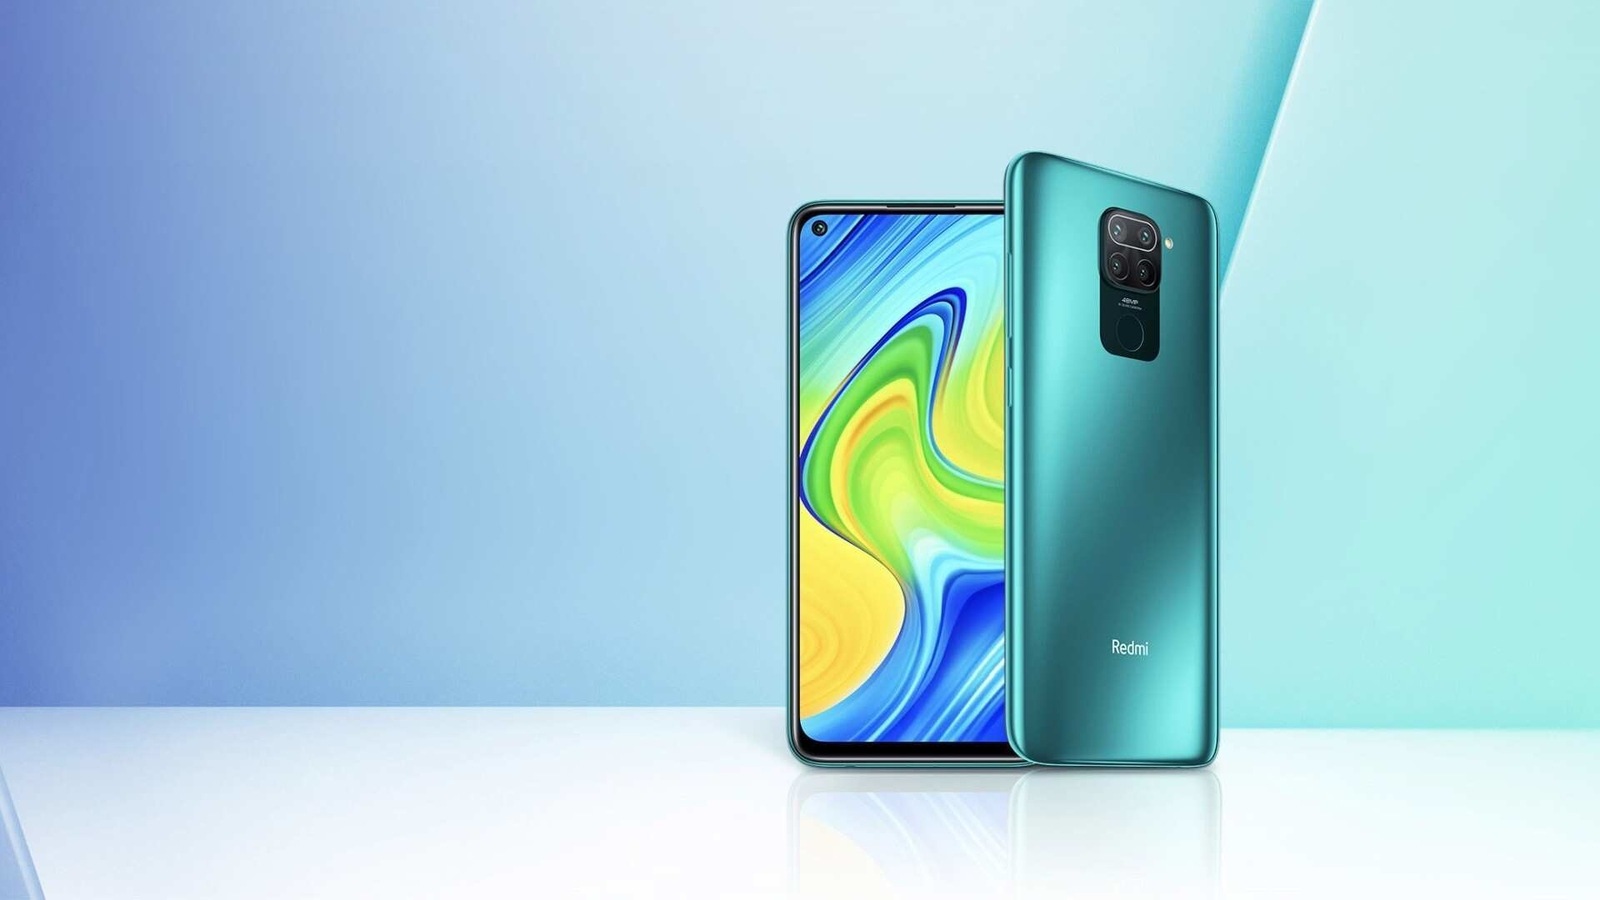 Redmi 9A, Redmi 9C launch date revealed: Here's what you need to know